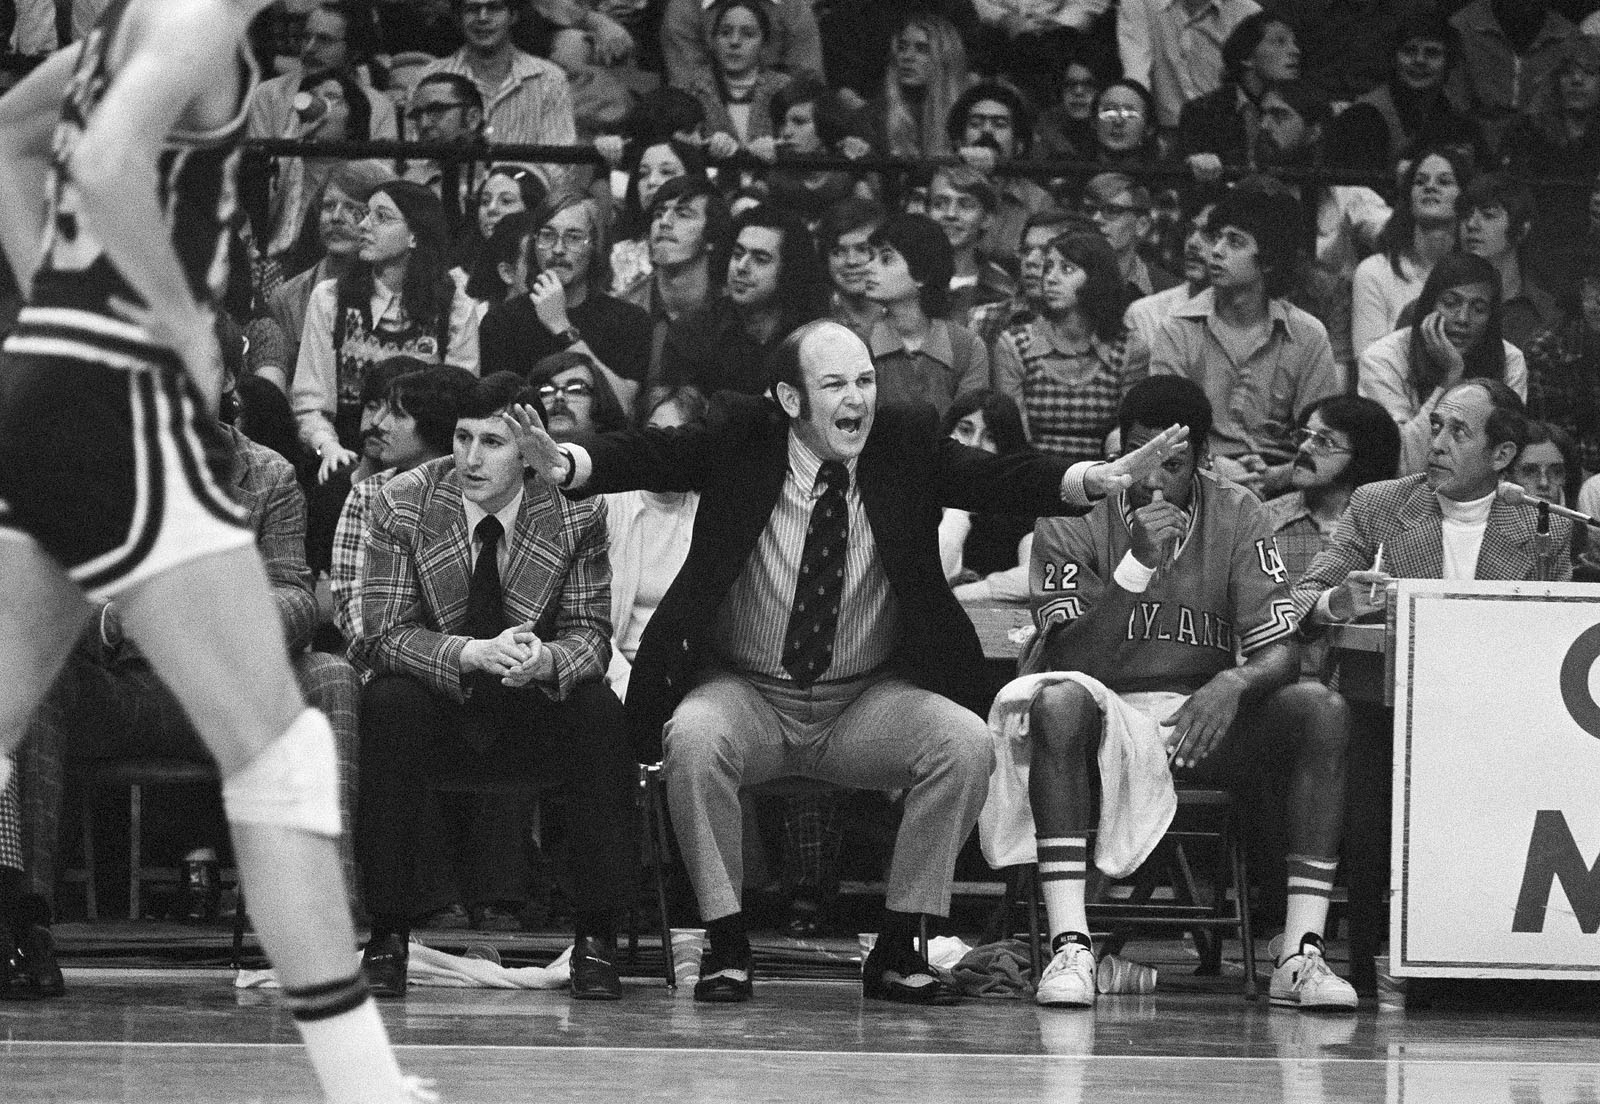 University of Maryland head basketball coach Charles "Lefty" Driesell shouts encouragement to his team as they clash with Duke University at College Park, Md., Feb. 2, 1974. (AP Photo/William Smith)